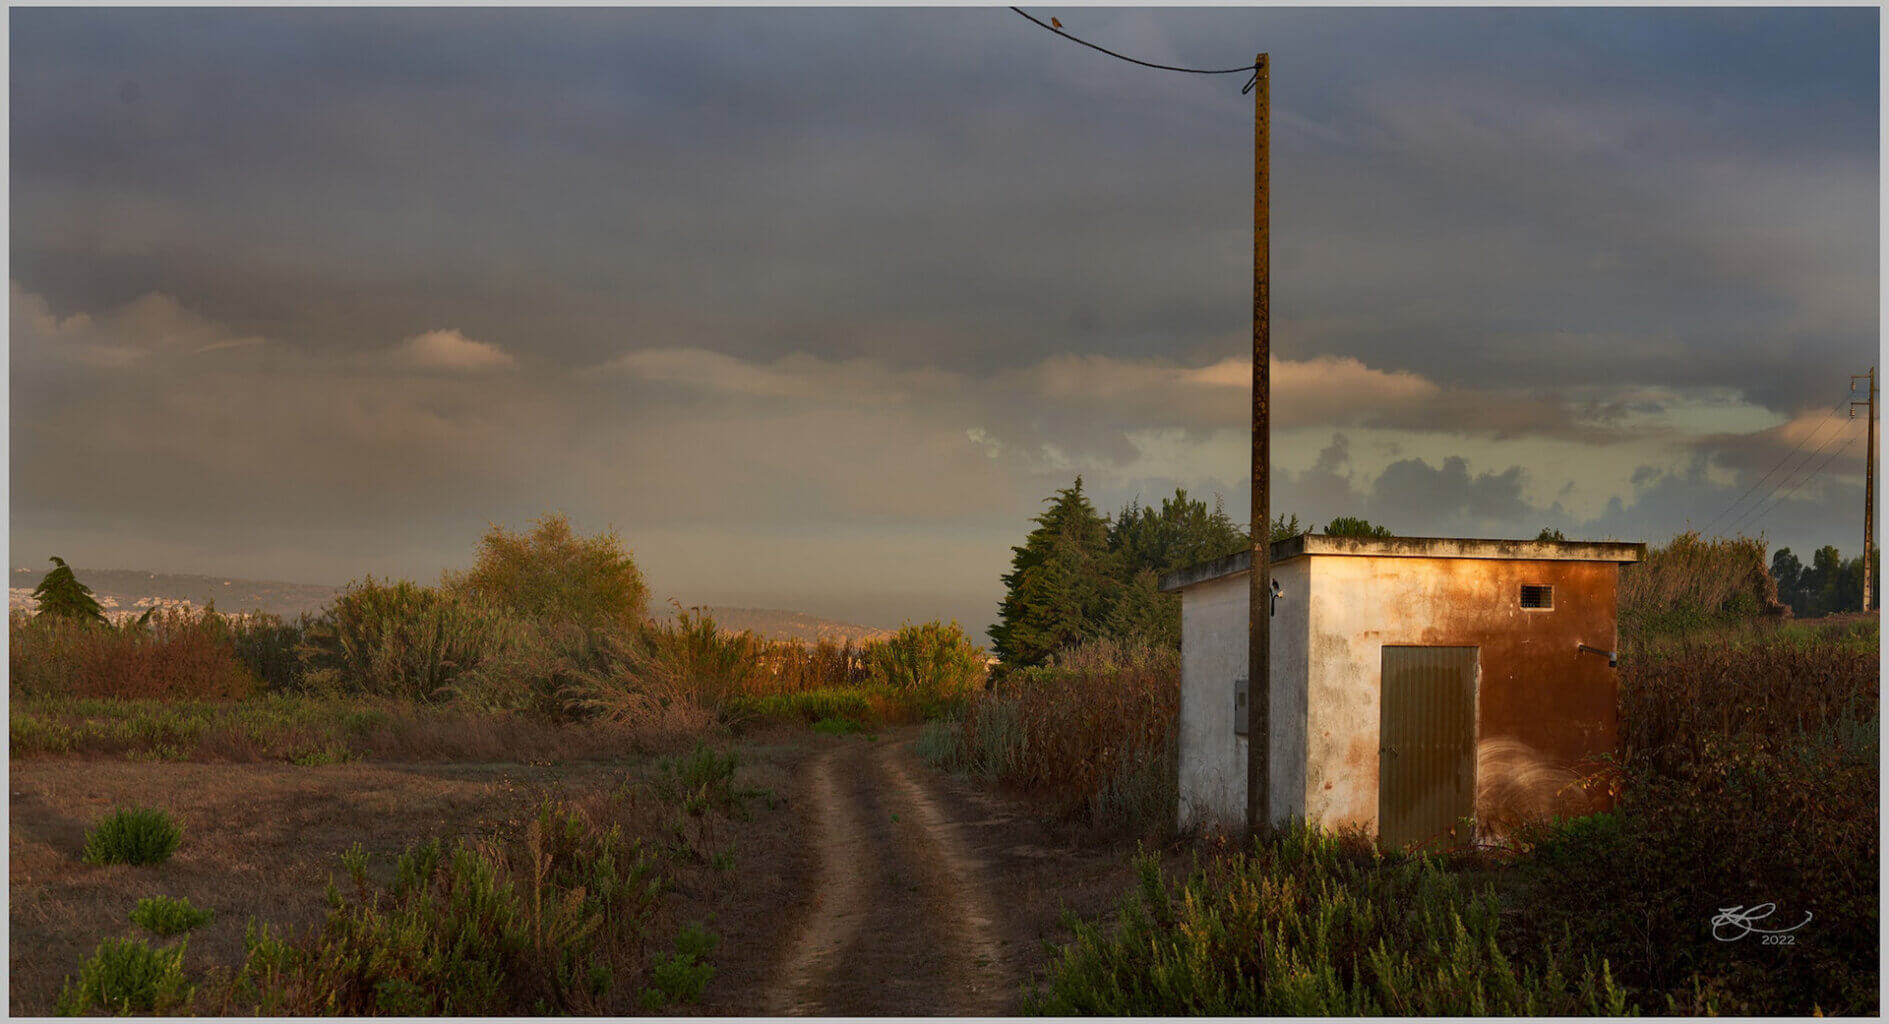 Photograph of an unpaved rural road among brush, under muted, post-sunset clouds. Next to the road is an electric pole and a small, simple building, painted white and rust-red.